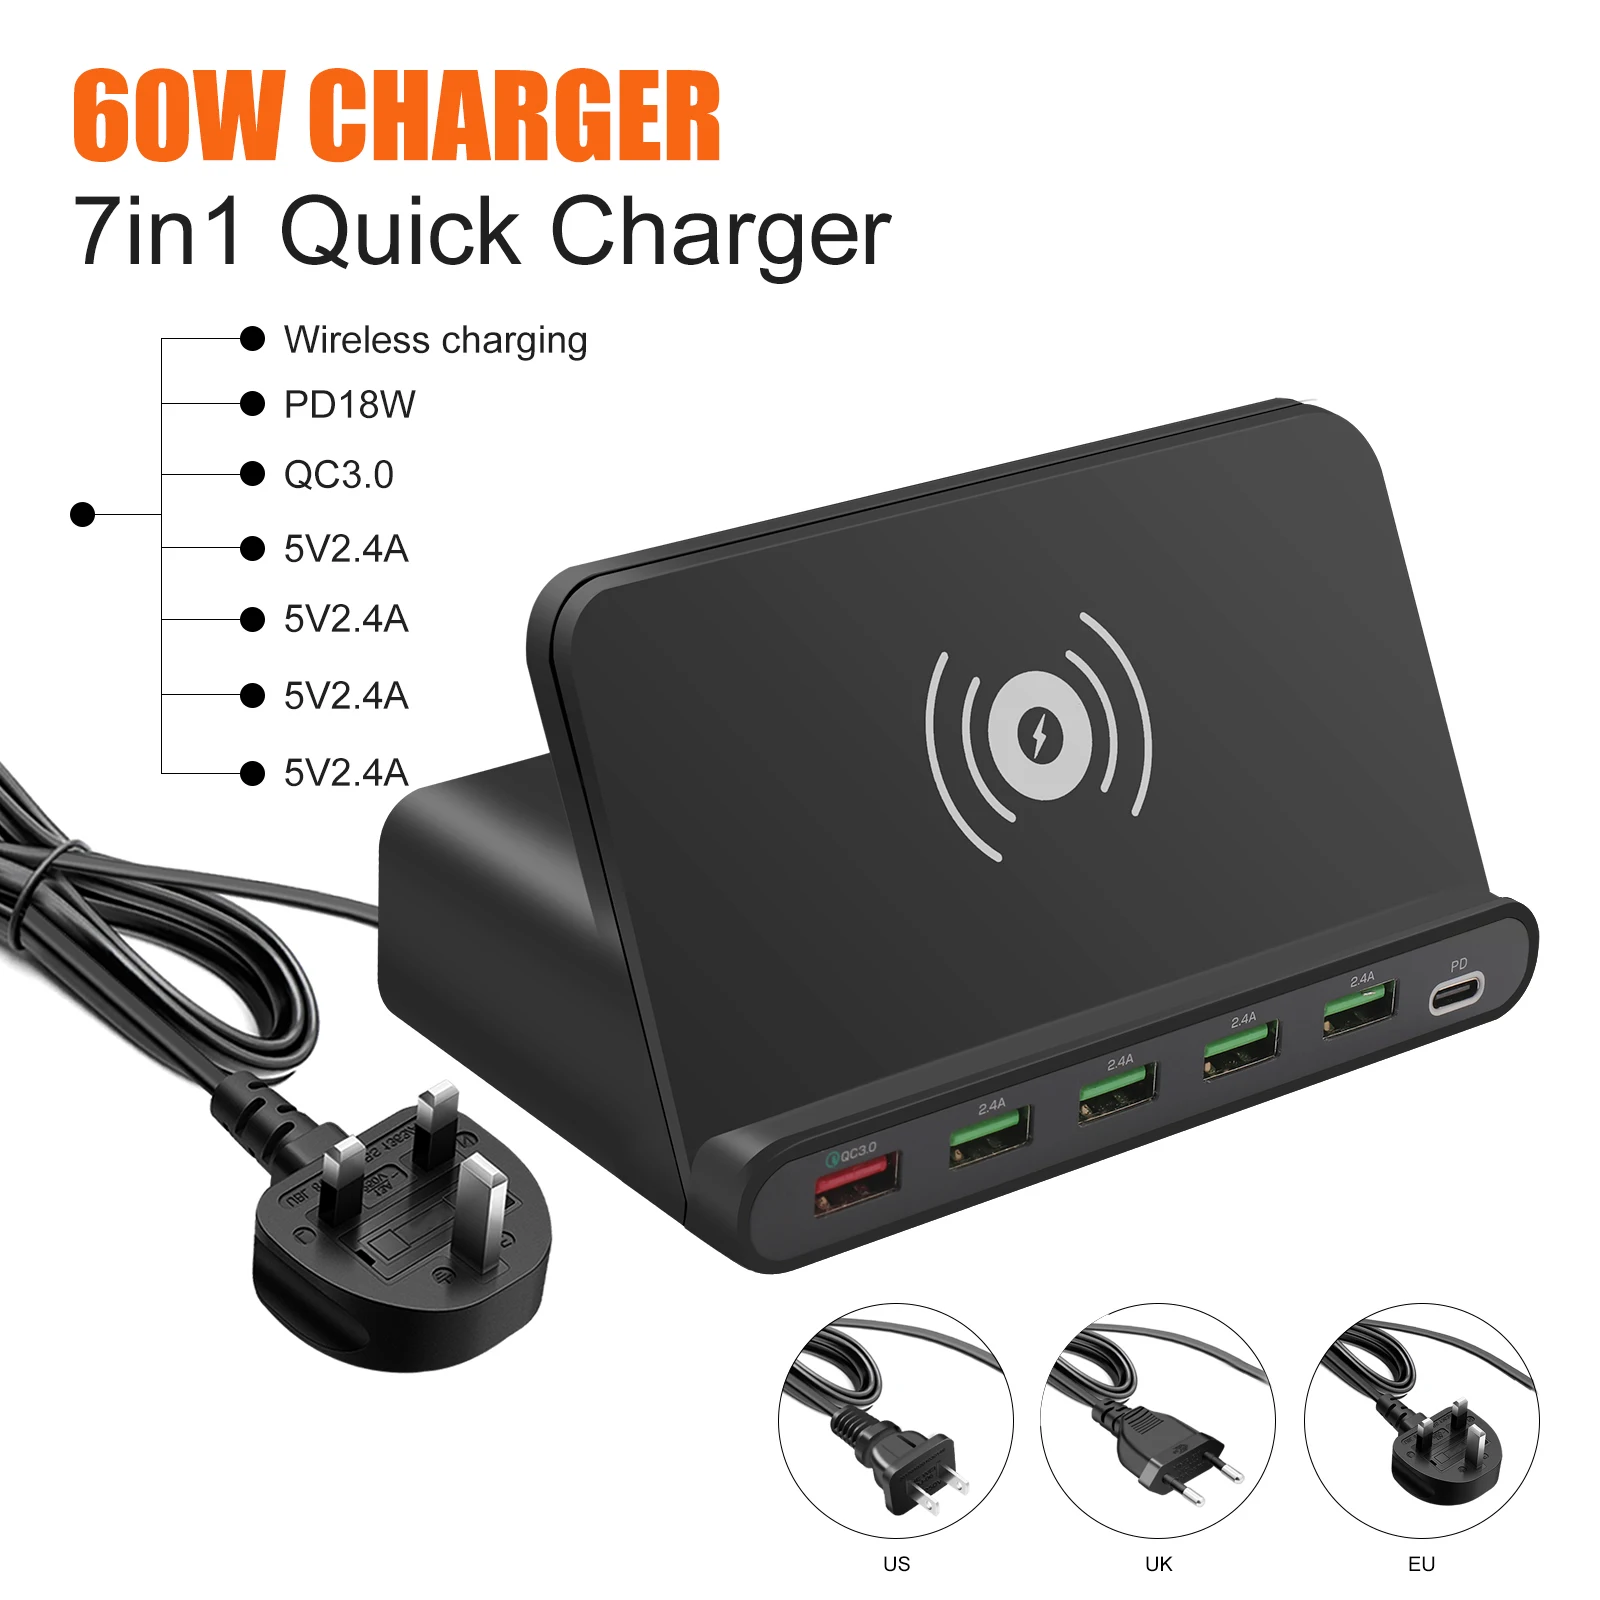 

6 Ports 60W USB Socket QI Wireless Charger with PD 18W QC3.0 USB Interface Office Fast Charging Power Adapter for IPhone Samsung